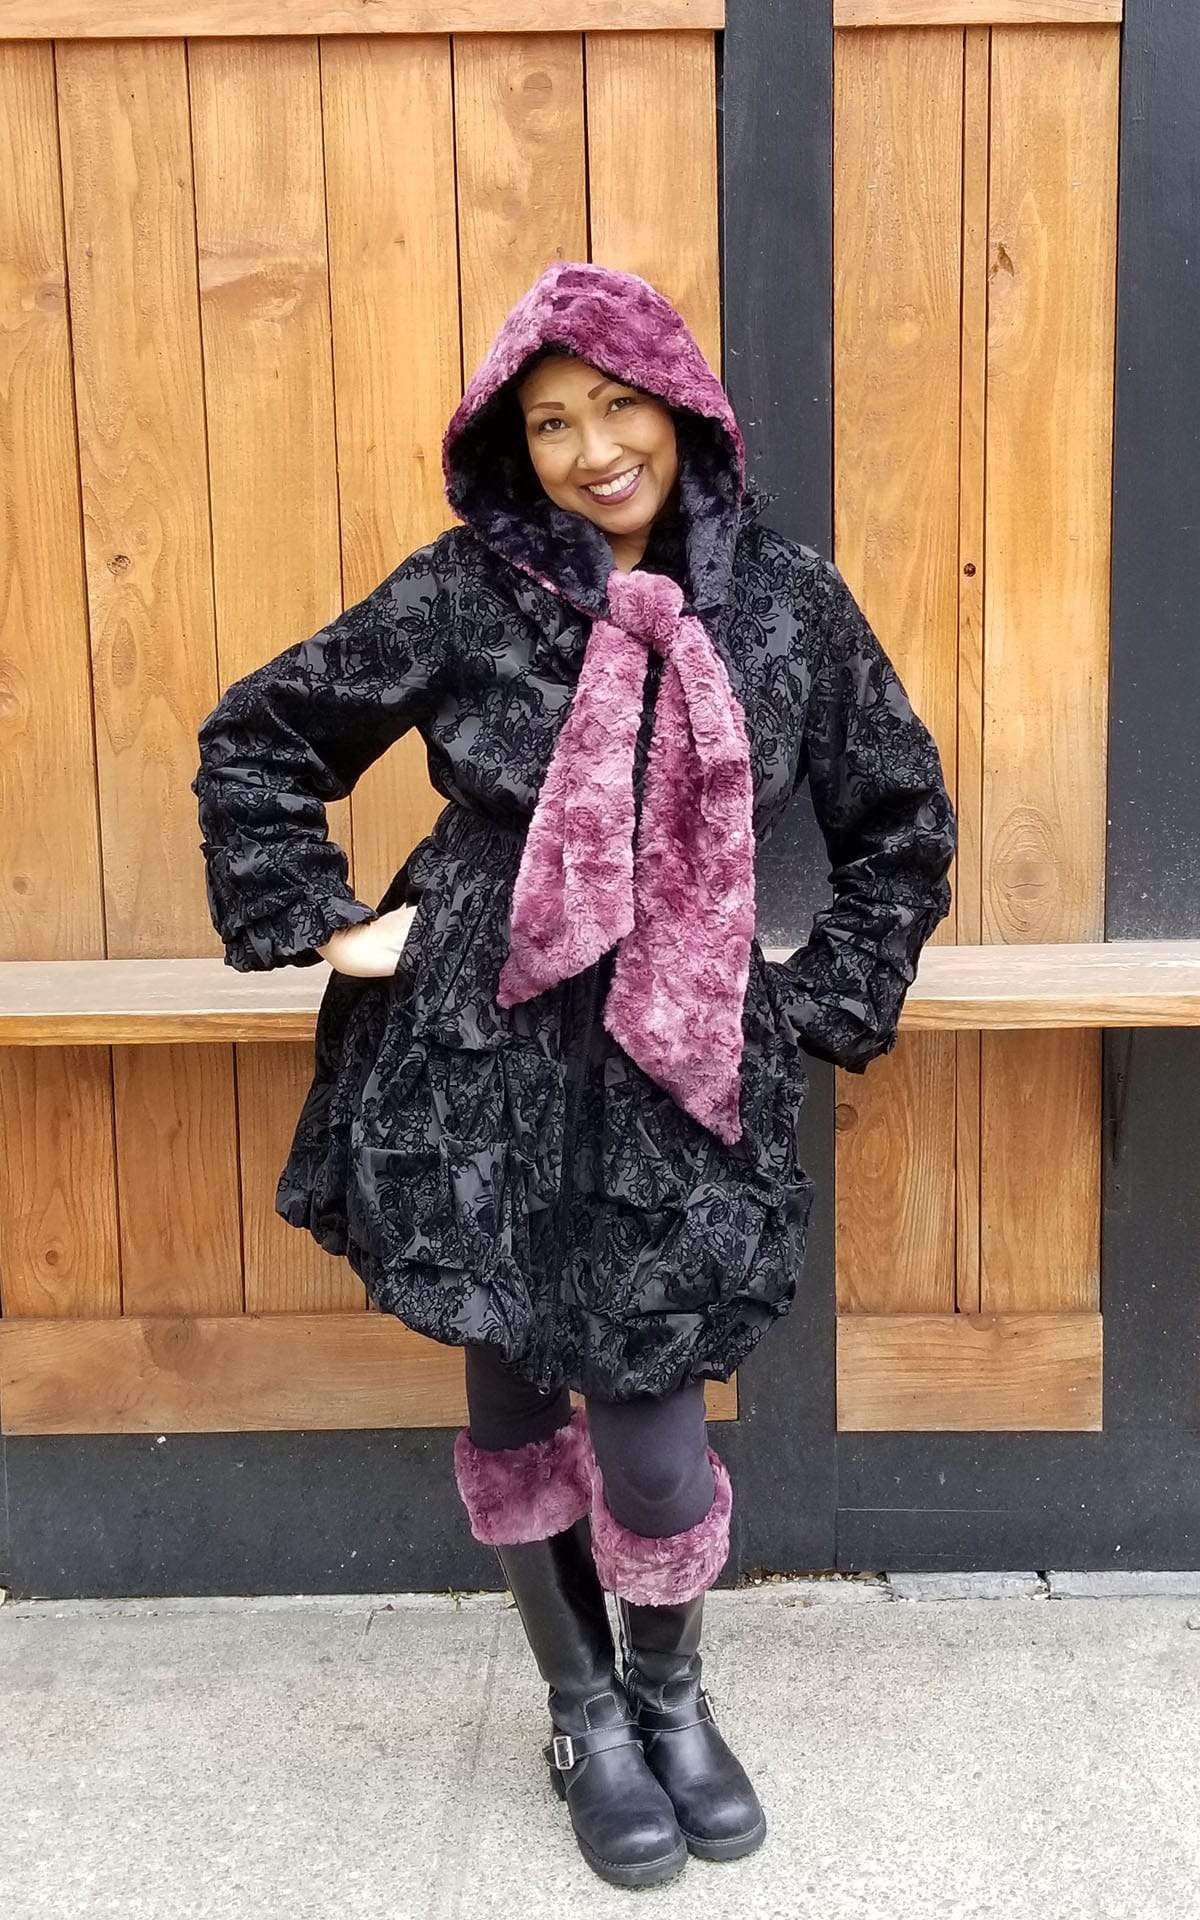 Model standing in front of wood fence wearing women’s Boot toppers and matching  Two-Tone Hooded Scarf | Highland in Thistle, Mauve reversing to Cuddly Fur in Sand, Ivory Faux Fur | Handmade in Seattle WA | Pandemonium Millinery